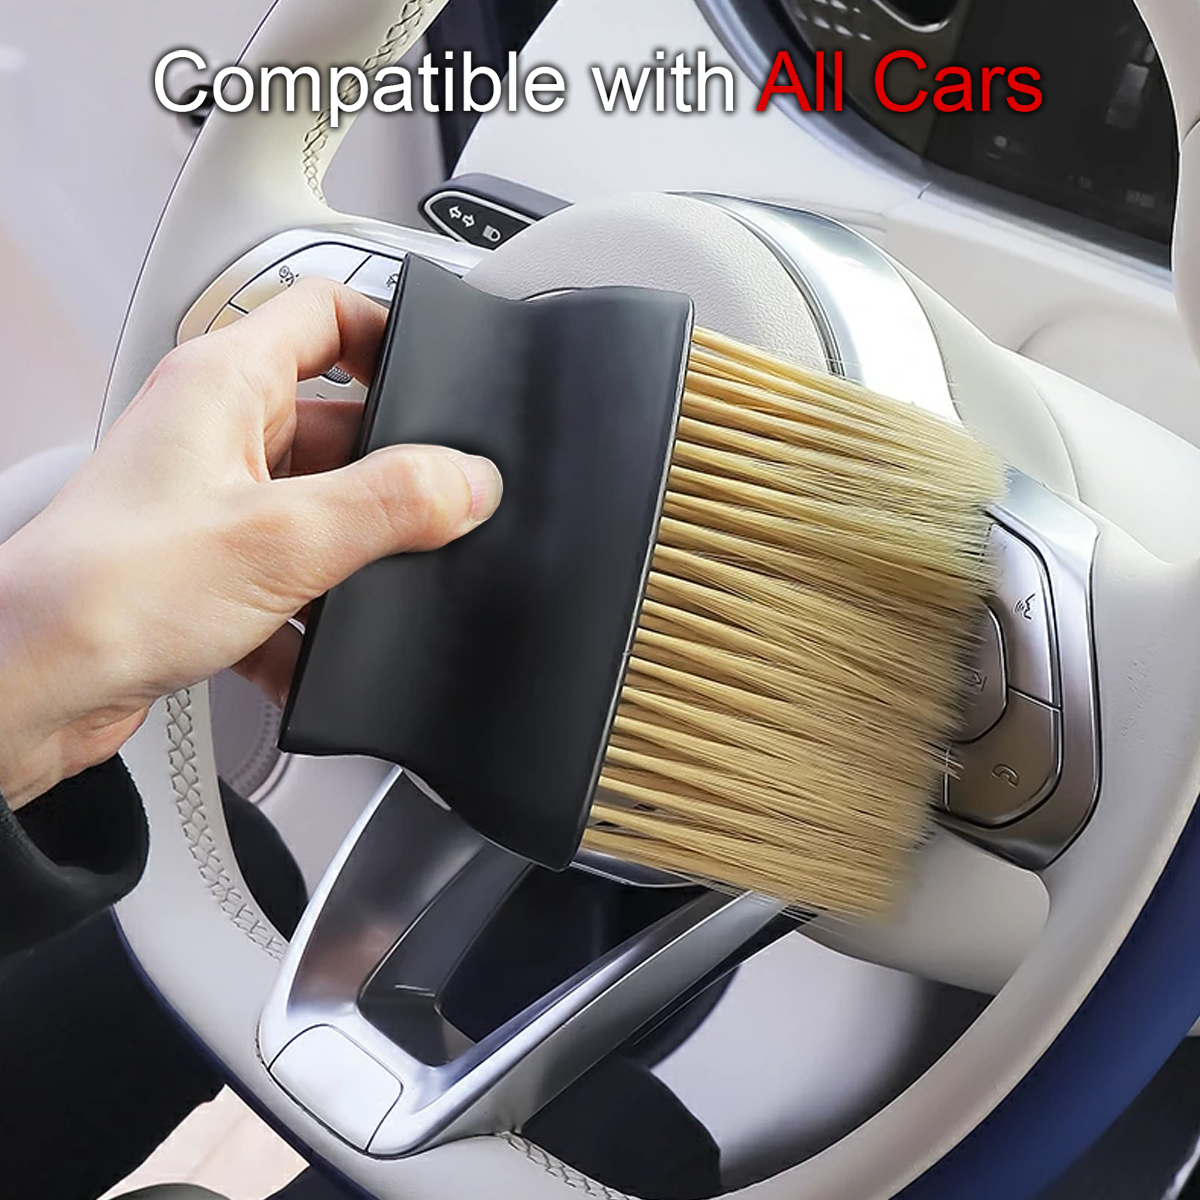 Car Cleaning Brushes Duster, Custom Fit For Your Cars, Soft Bristles Detailing Brush Dusting Tool for Automotive Dashboard, Air Conditioner Vents, Leather, Computer, Scratch Free